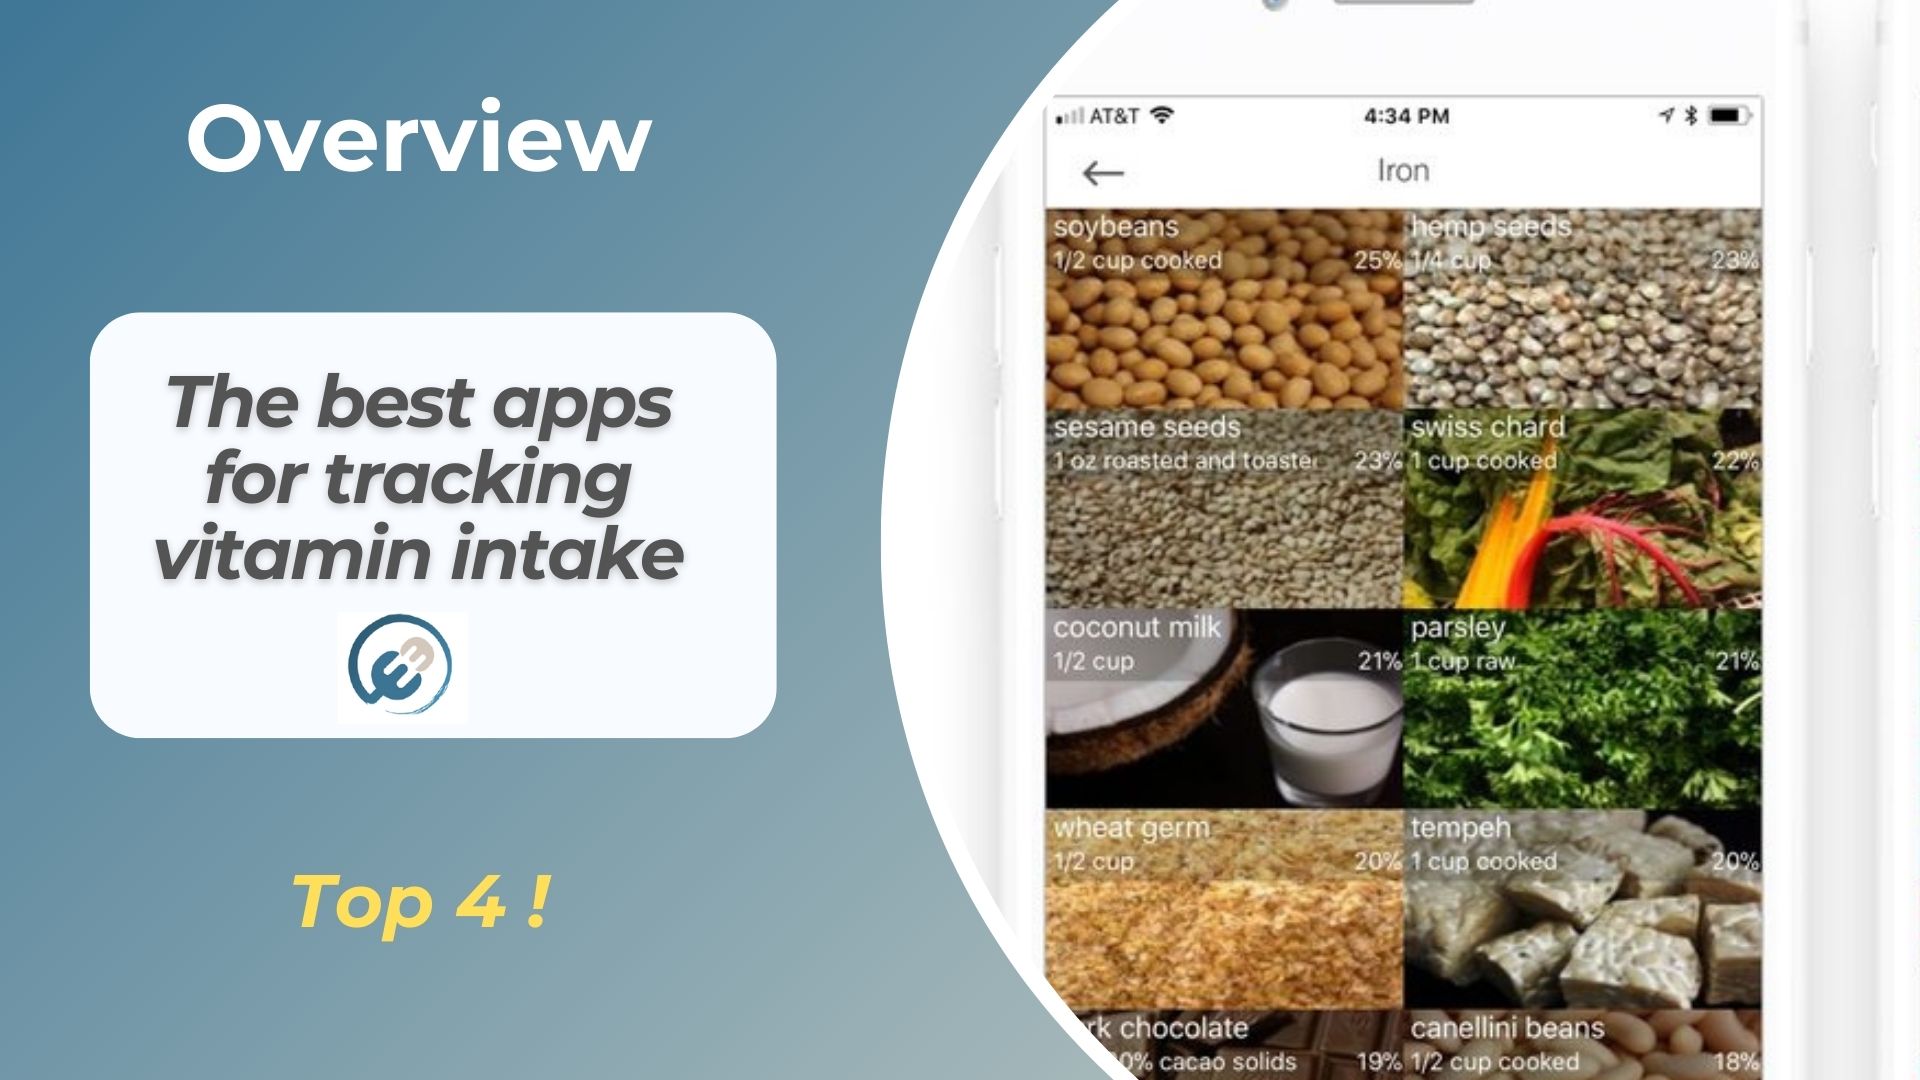 The best apps for tracking vitamin intake